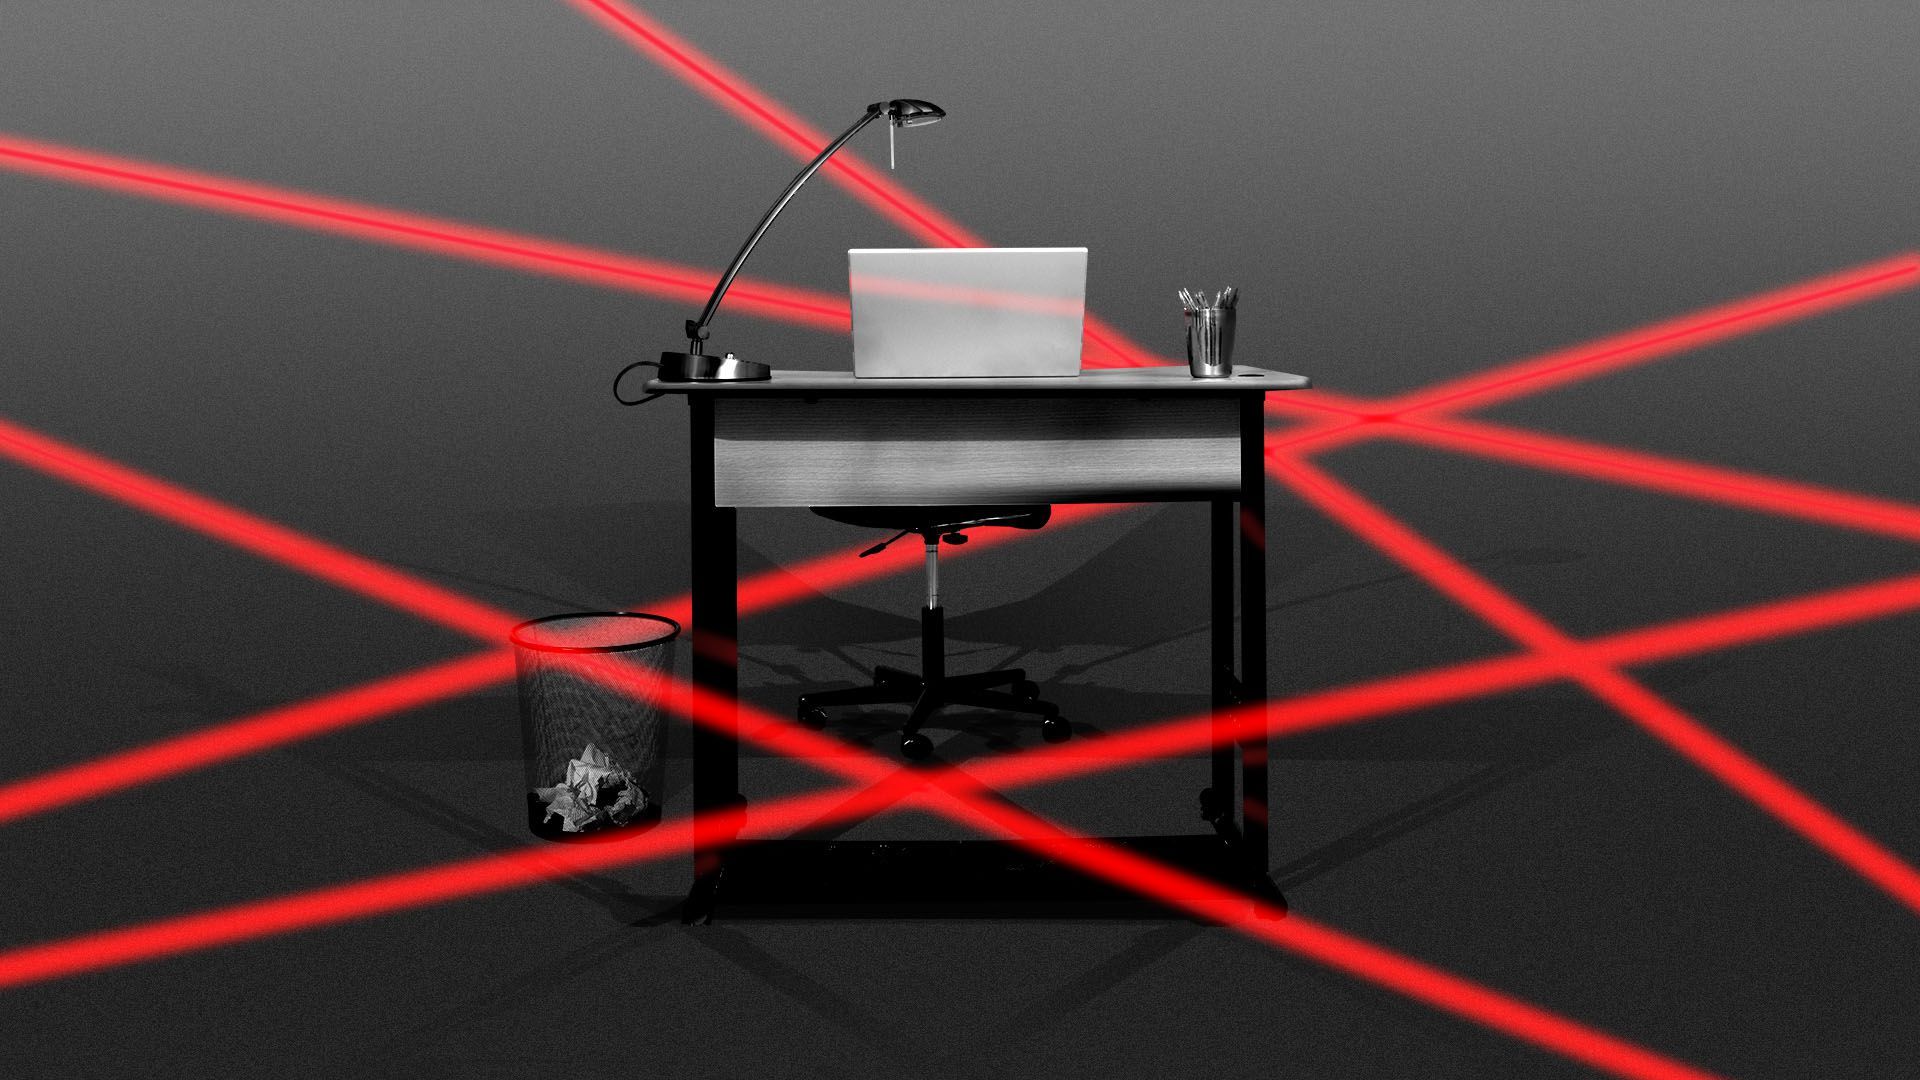 Illustration of an office desk surrounded by lasers